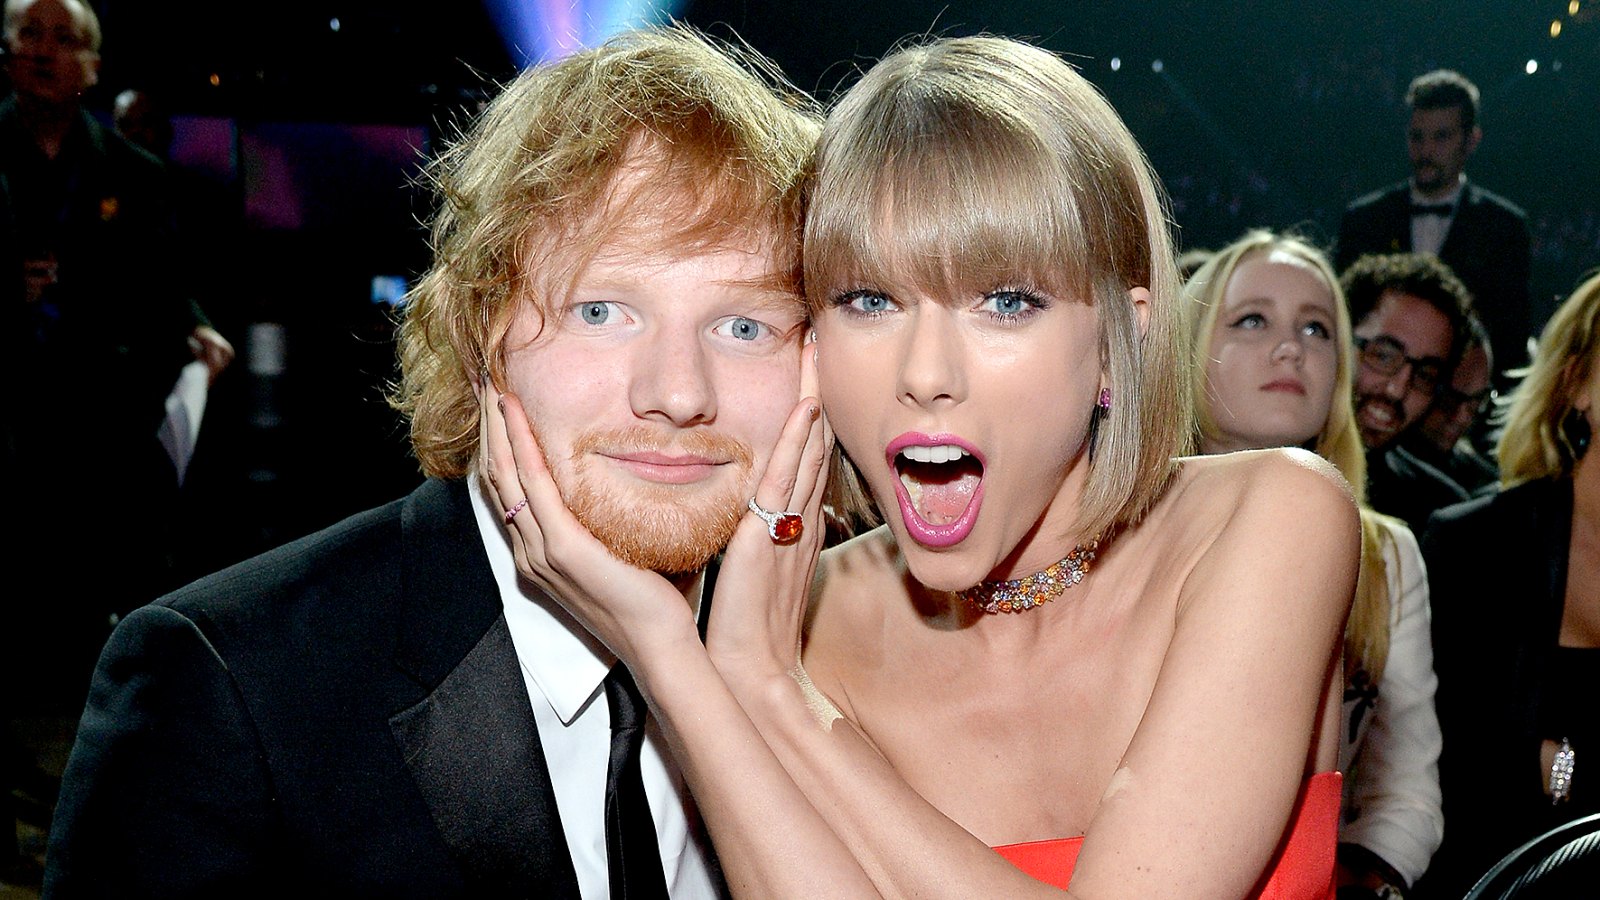 Ed Sheeran and Taylor Swift attend The 58th GRAMMY Awards at Staples Center on February 15, 2016 in Los Angeles, California.